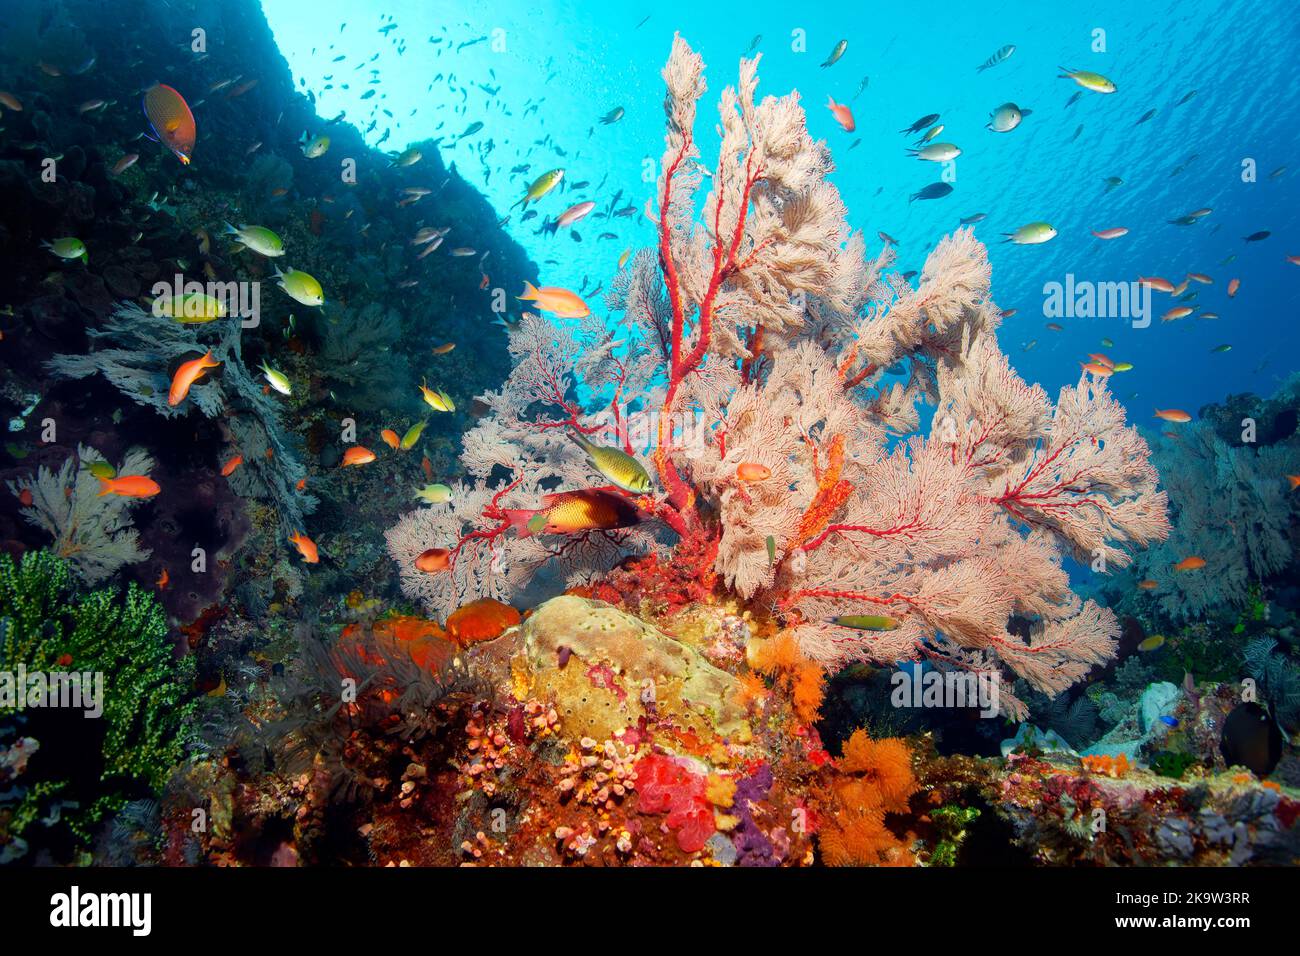 Reef slope in coral reef with various multicoloured soft corals (Alcyonacea), large Melithea gorgonian (Melithea sp.), stony corals (Scleractinia) Stock Photo